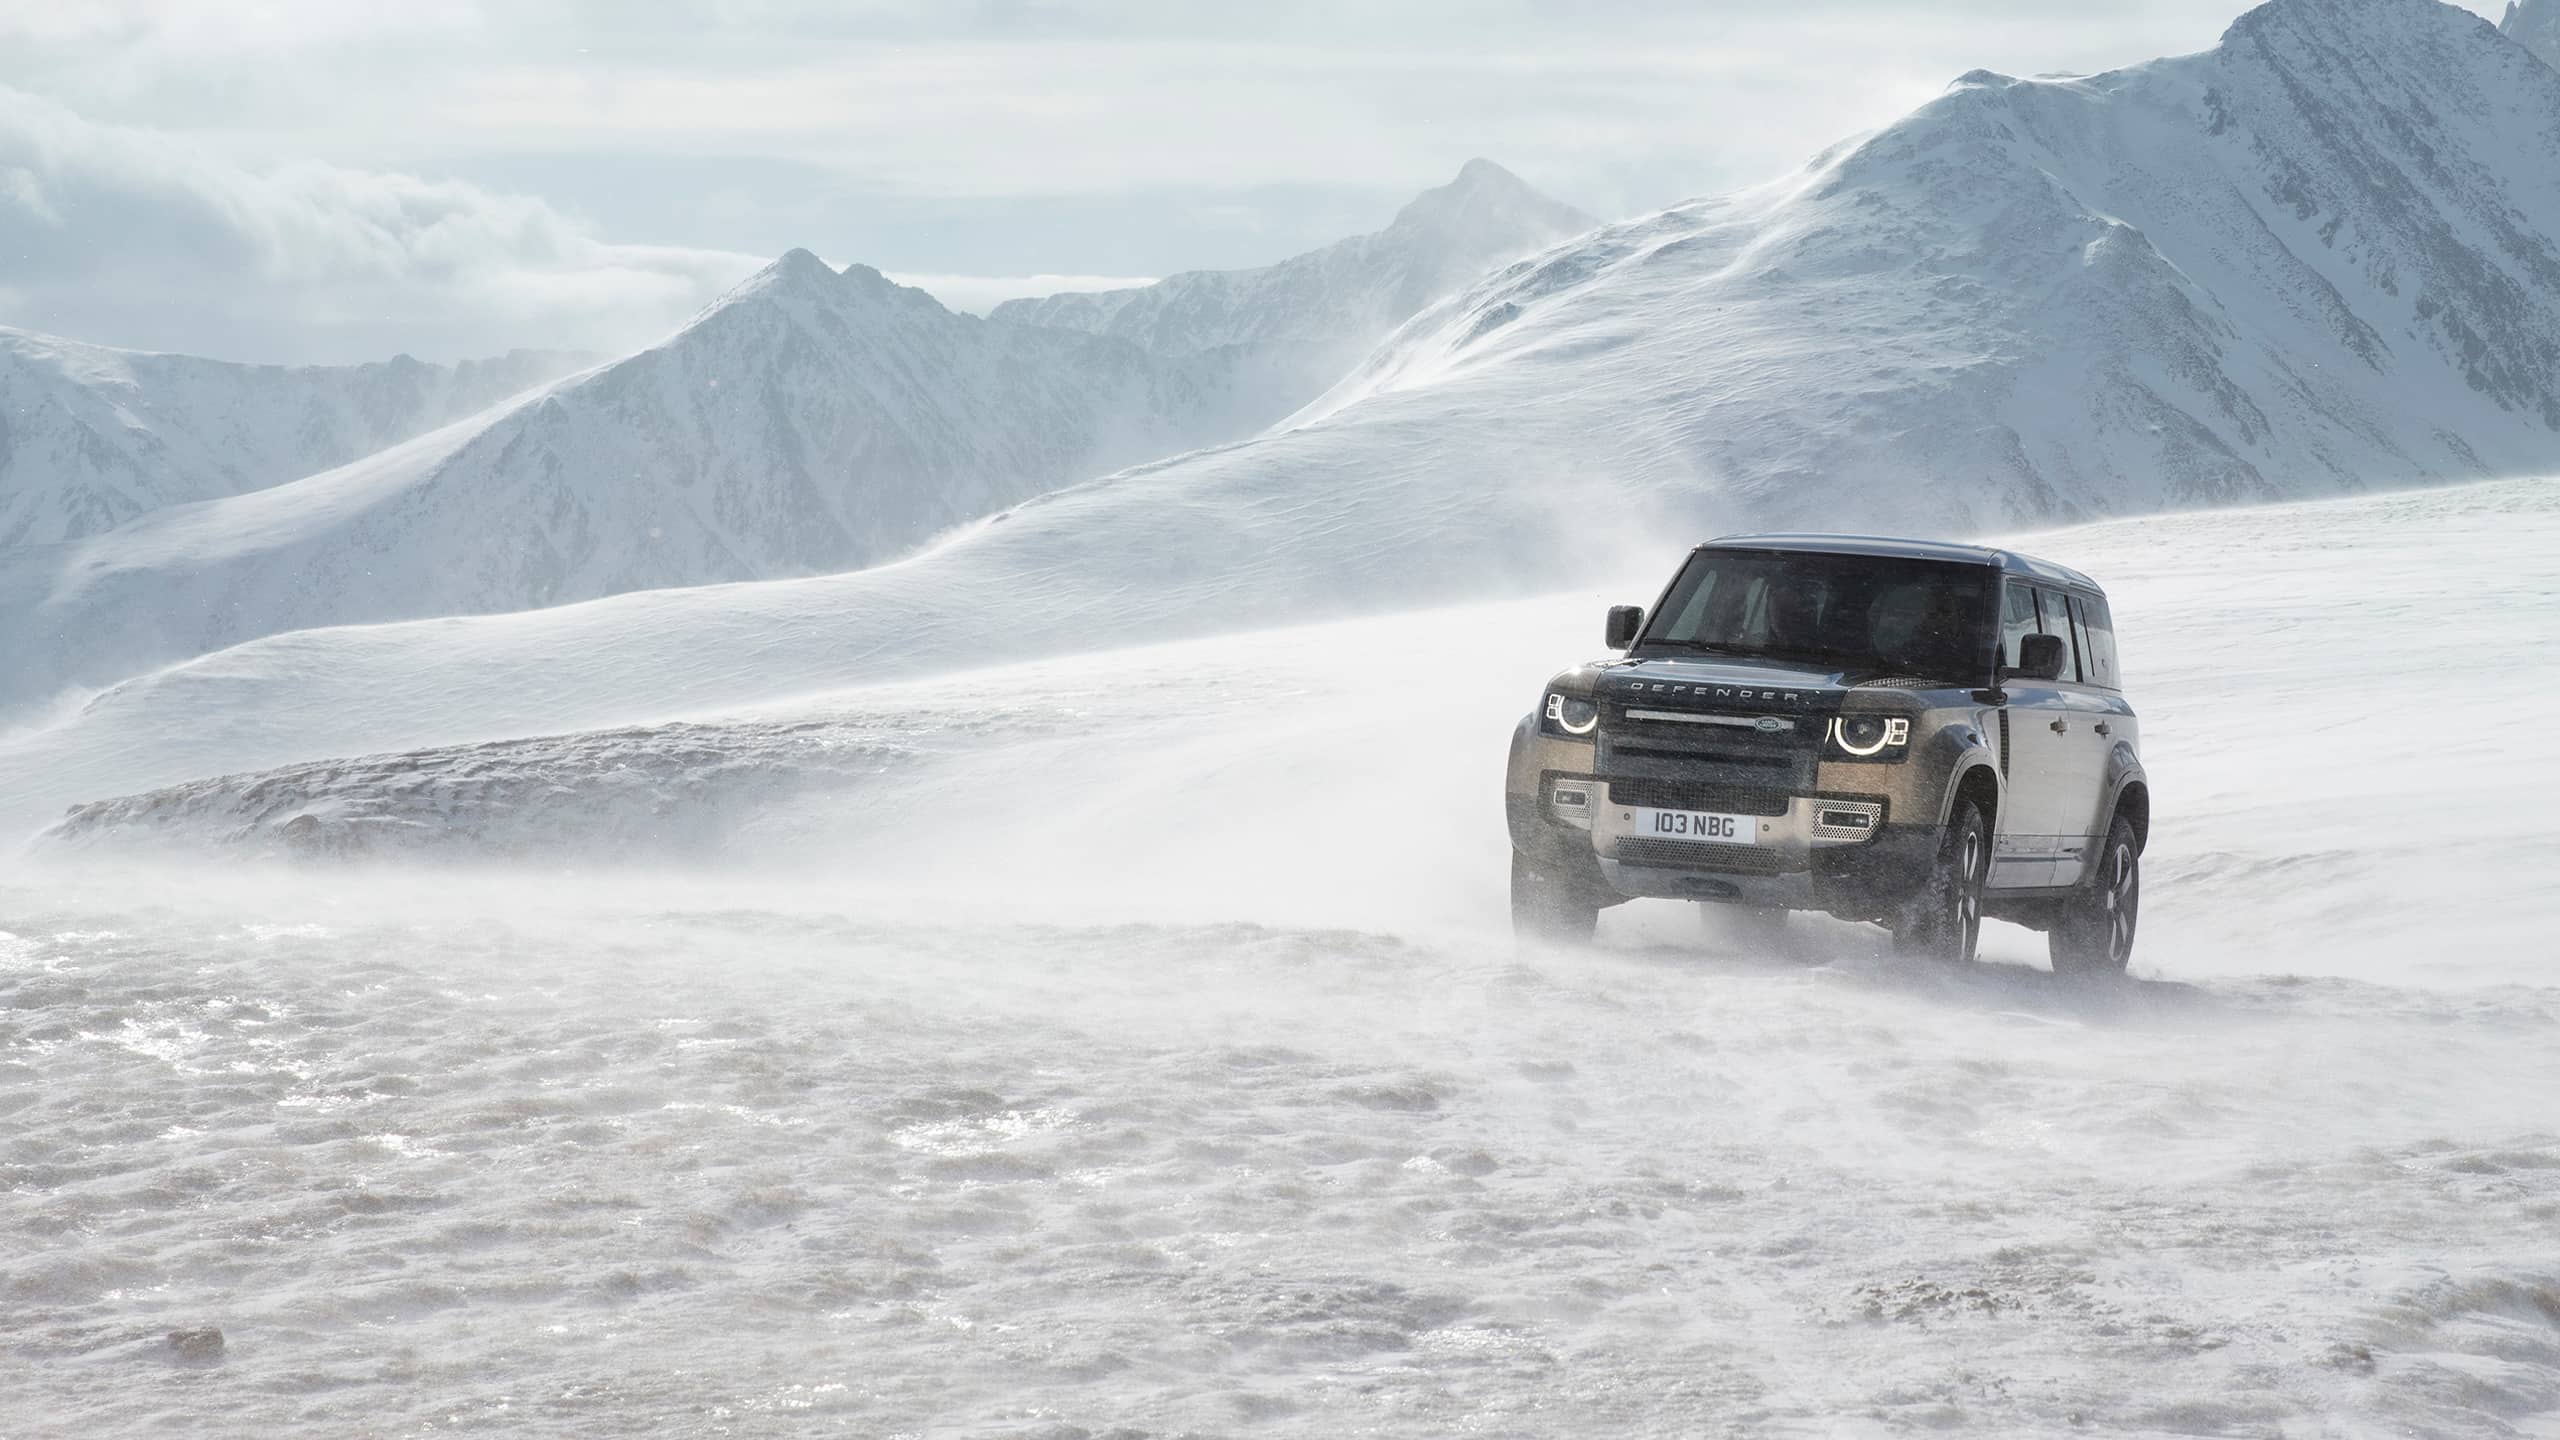 Defender on a snowy mountain